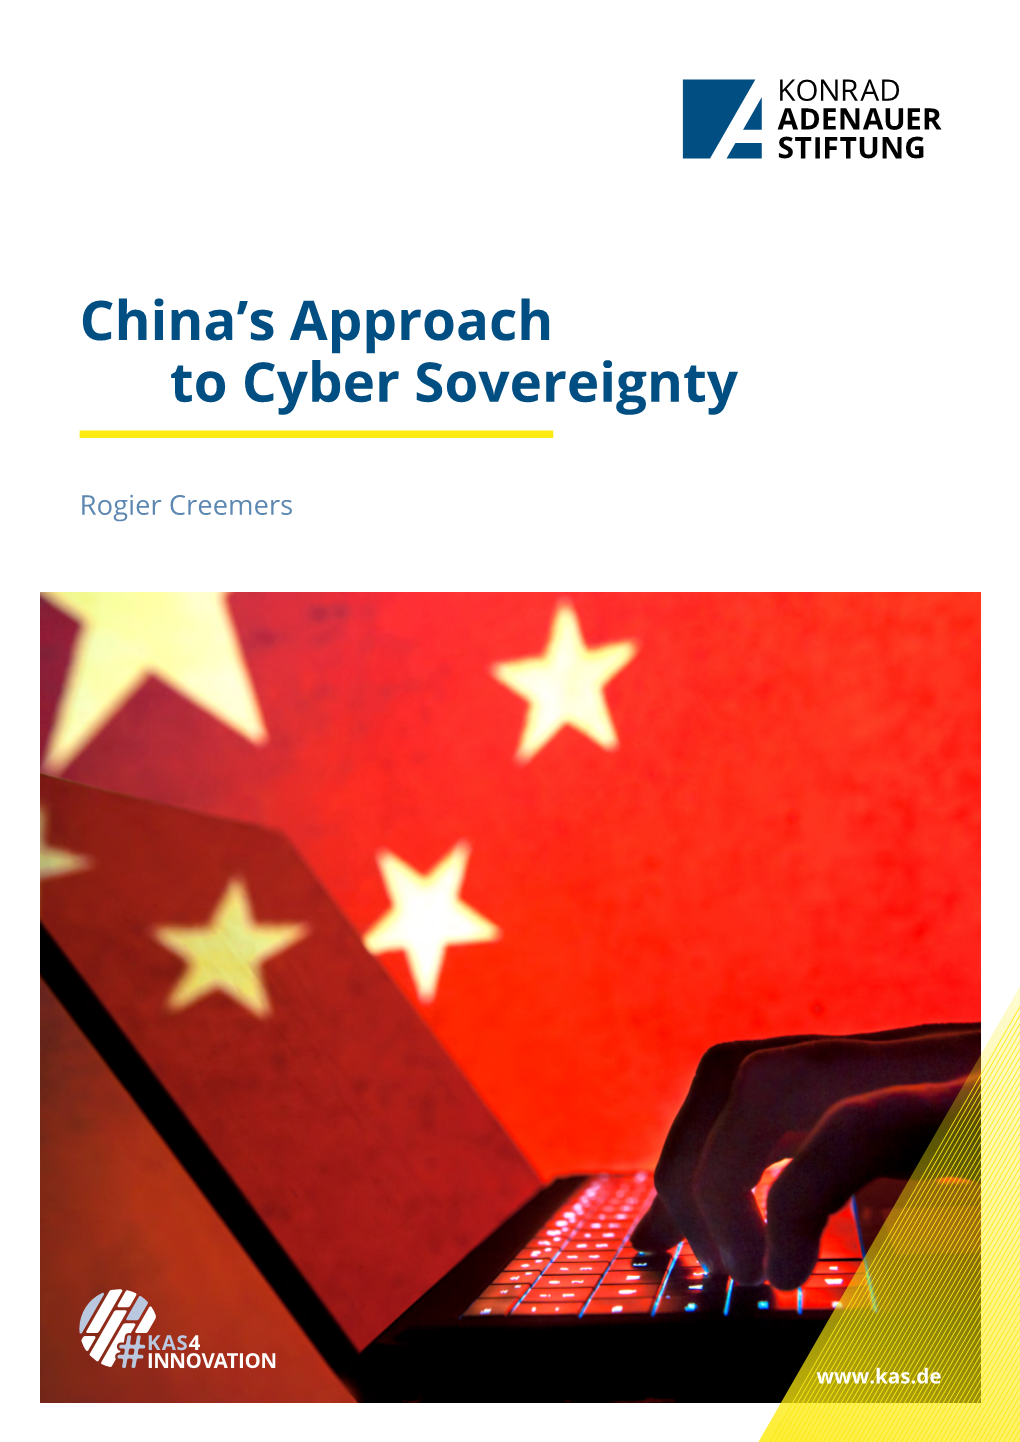 China's Approach to Cyber Sovereignty